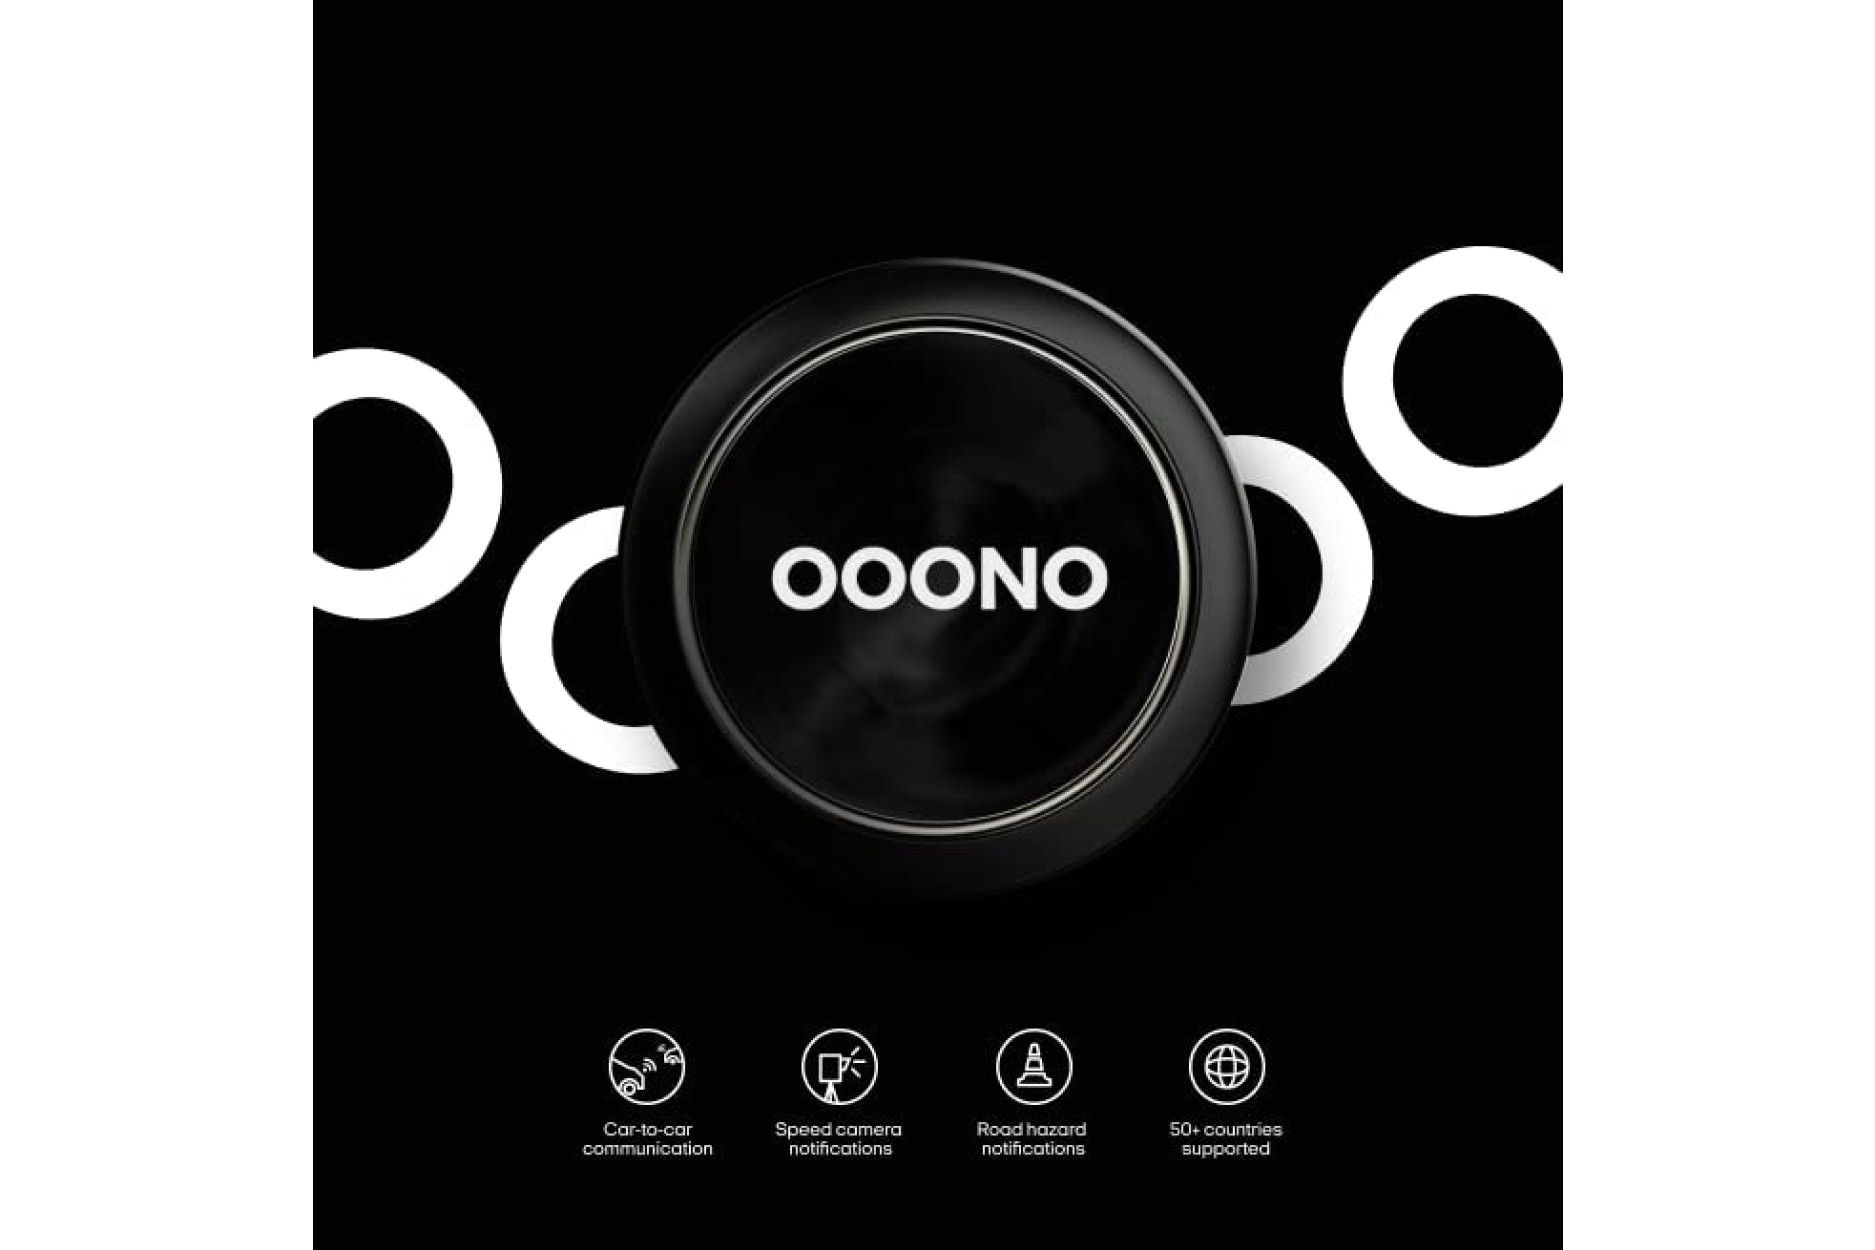 OOONO CO-Driver NO1: Warns of speed cameras and road traffic